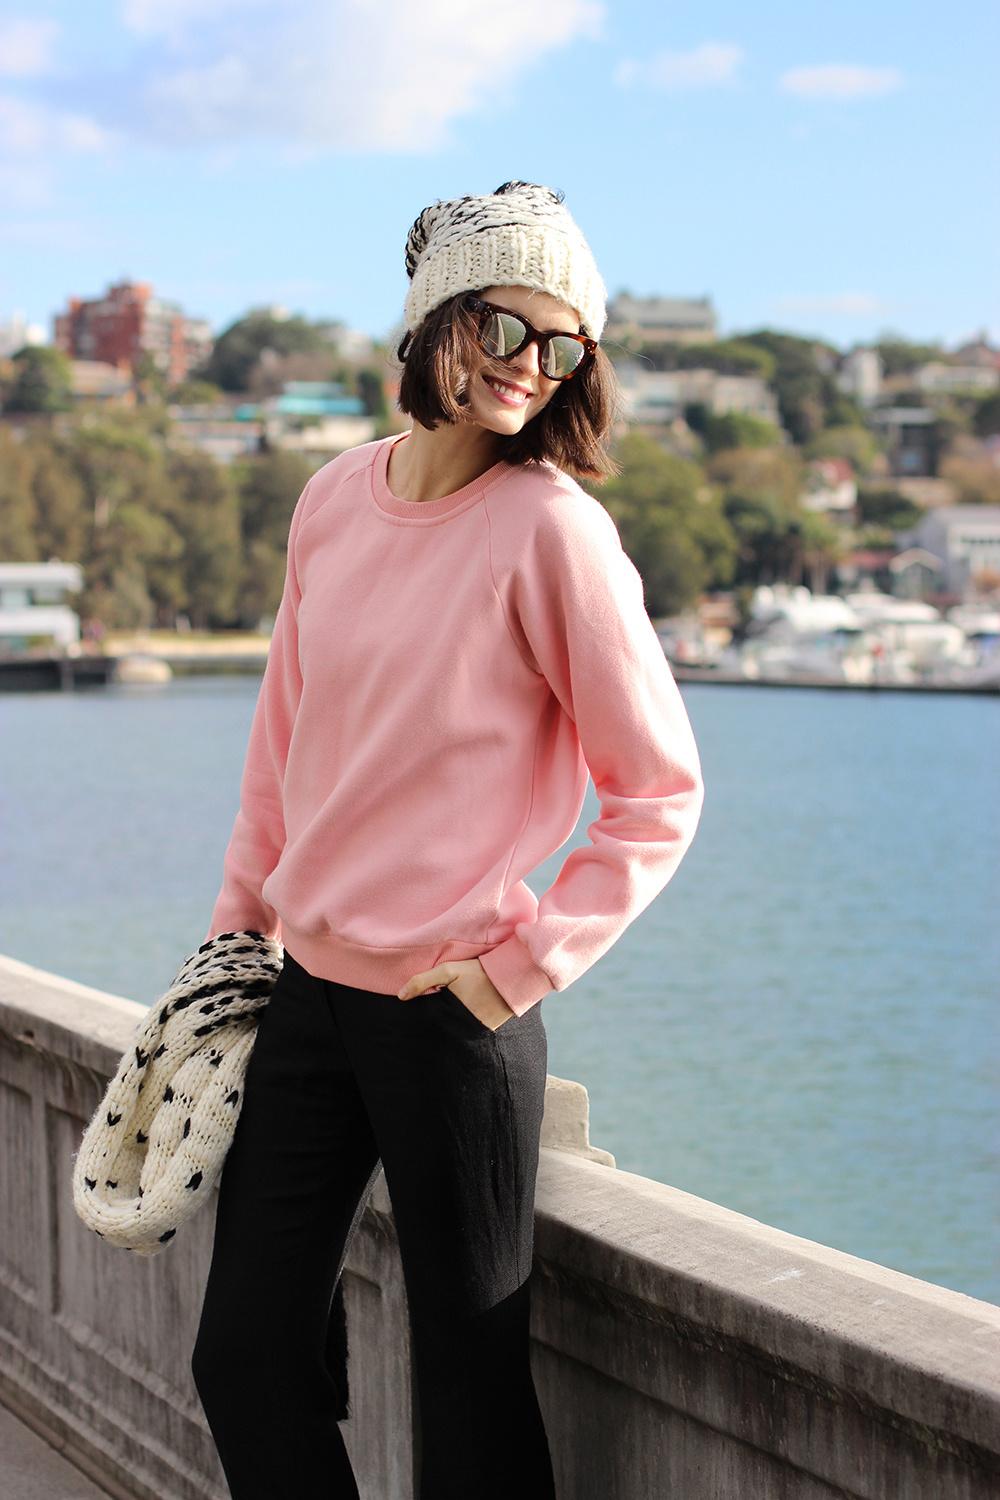 CHLOE CHILL FASHION AND SHOPPING BLOG | Morrison Clothing knitted beanie and scarf, Vale Denim pink fluffy sweater, Stella McCartney flare trousers, New Balance sneakers and Spektre reflective sunglasses